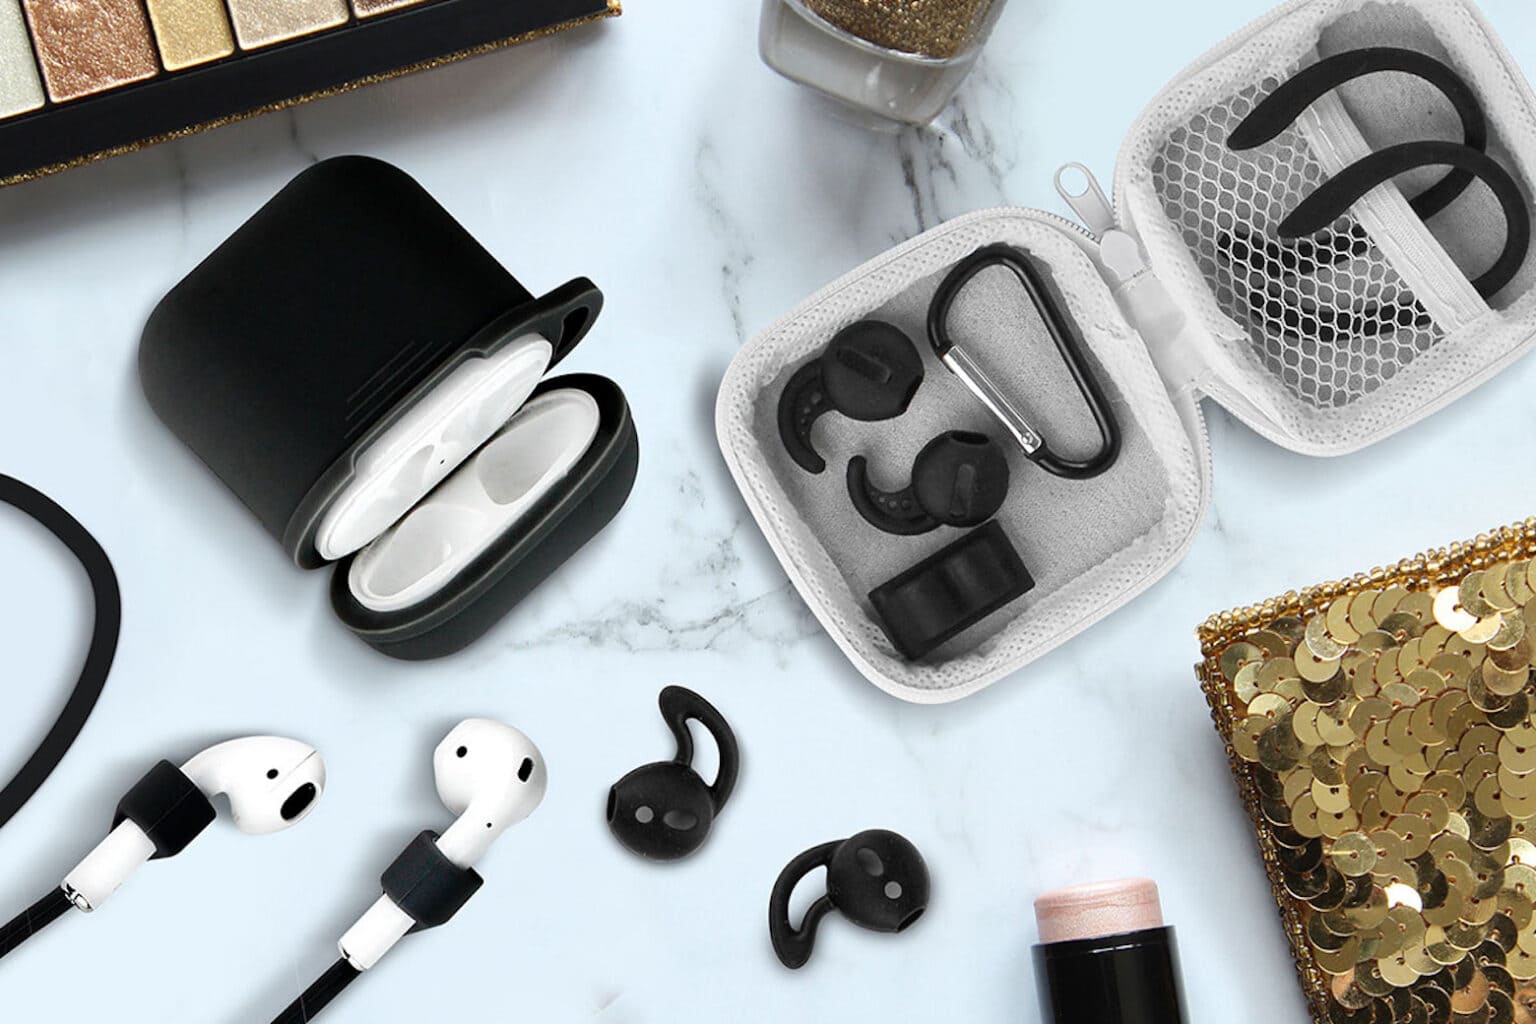 These 10 Apple AirPod accessories are on sale.